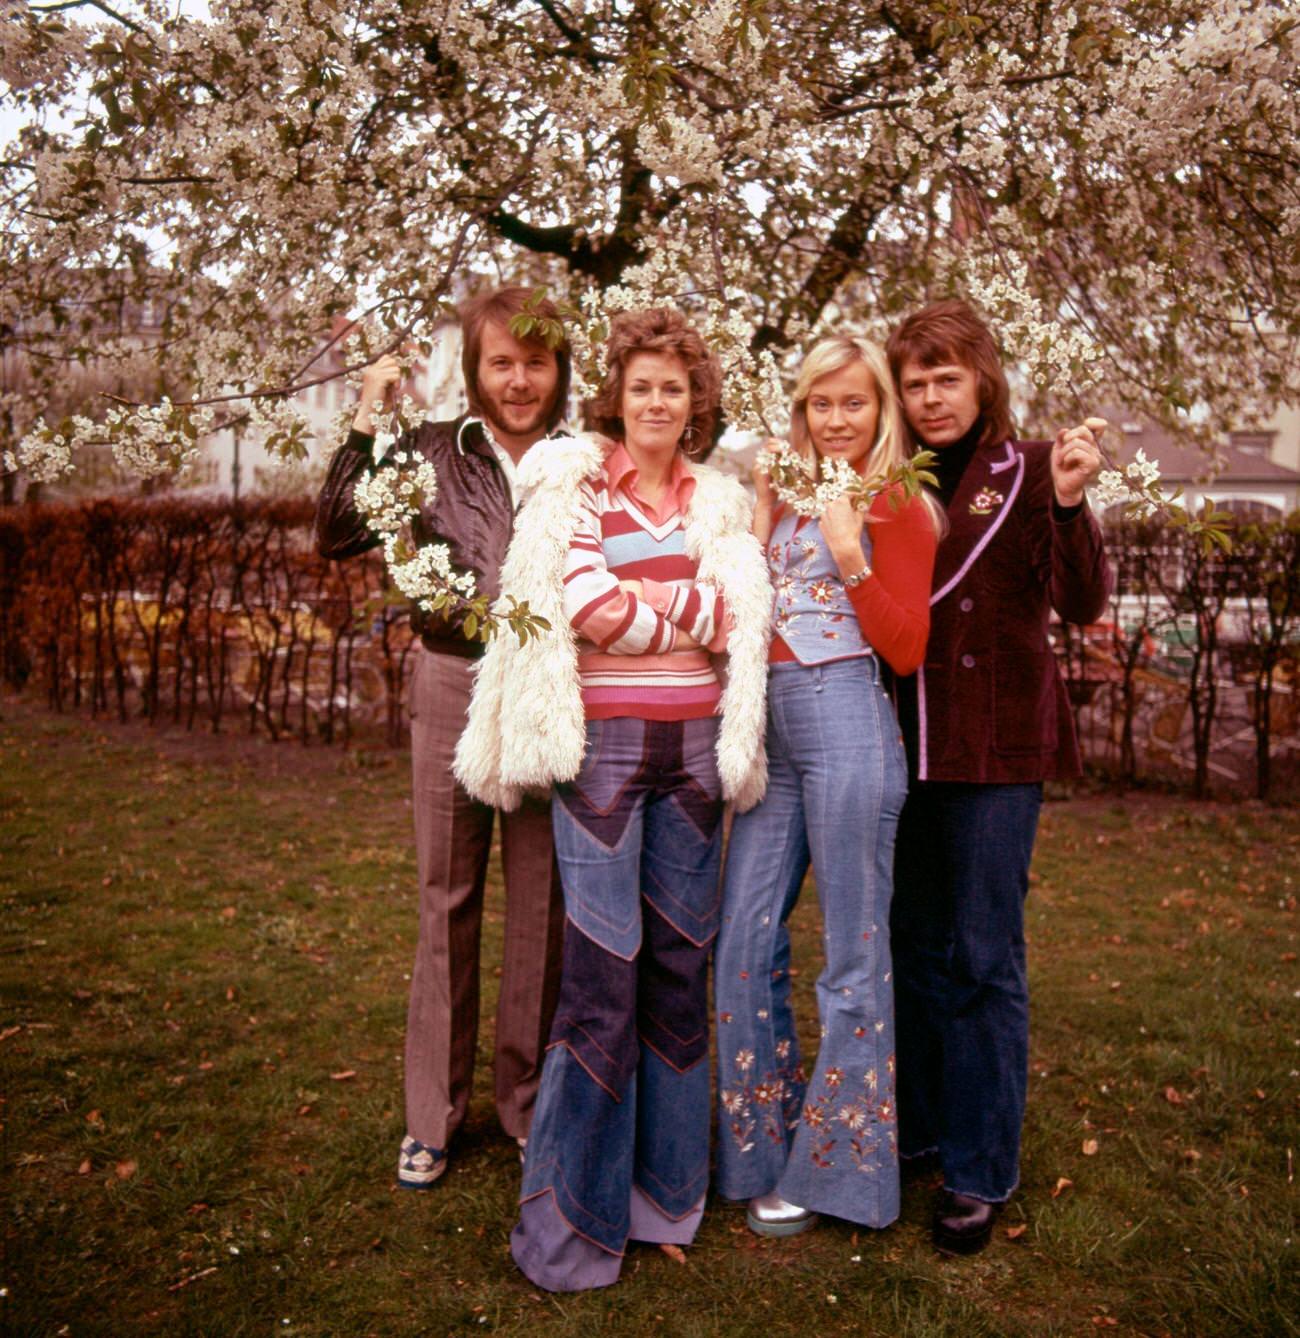 Benny Andersson, Anni-Frid Lyngstad, Agnetha Faltskog and Bjorn Ulvaeus of Swedish pop group ABBA pose for a group portrait in a garden in Copenhagen, Denmark in April 1974.